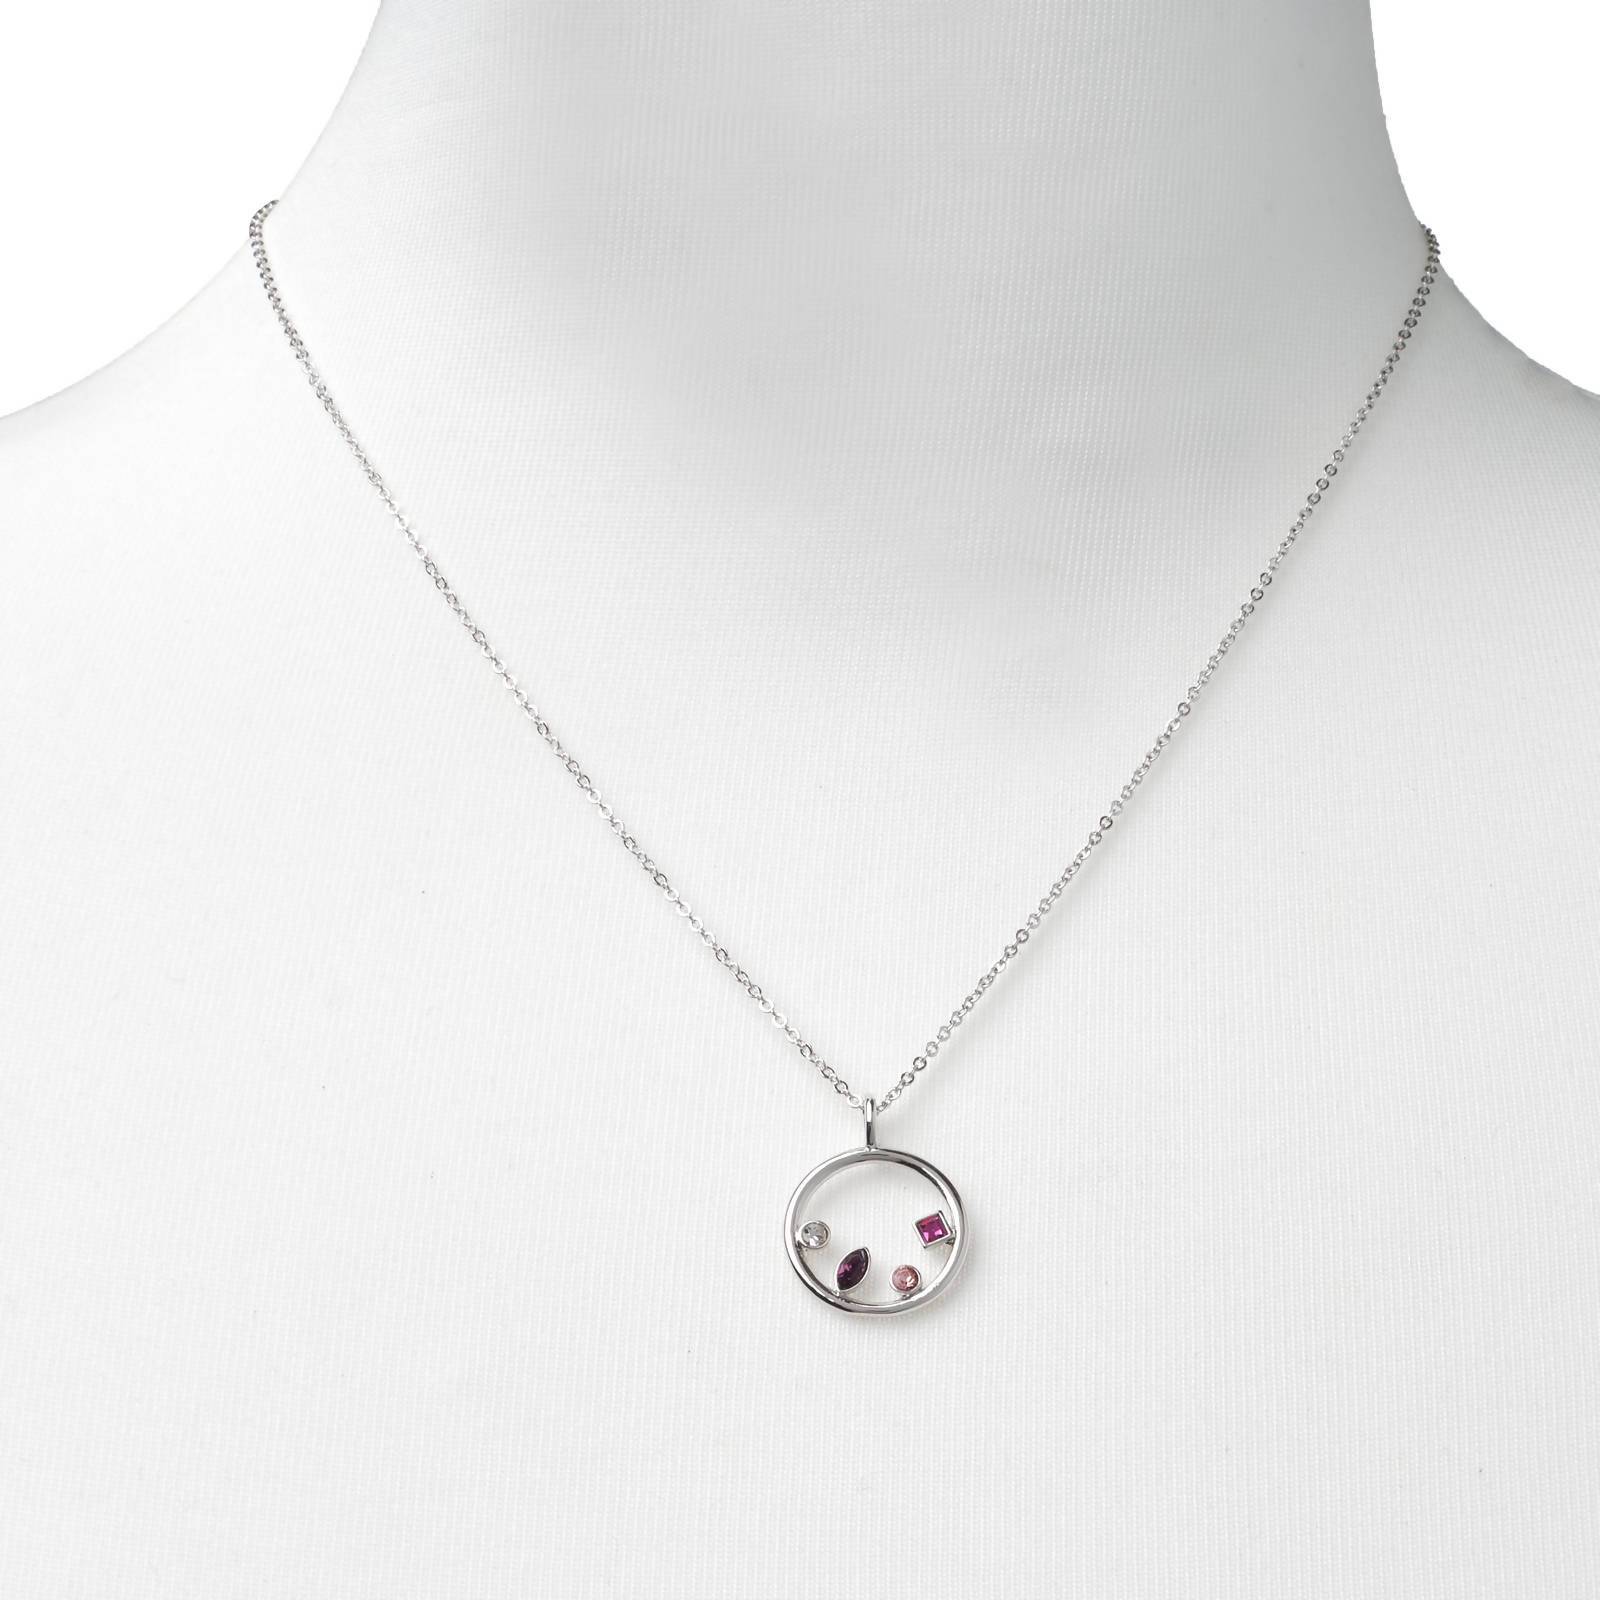 Celestial Pendant- Inspired by the Celestial Skies. Crystals made from Swarovski Elements Local Jewellery Forest Jewelry 